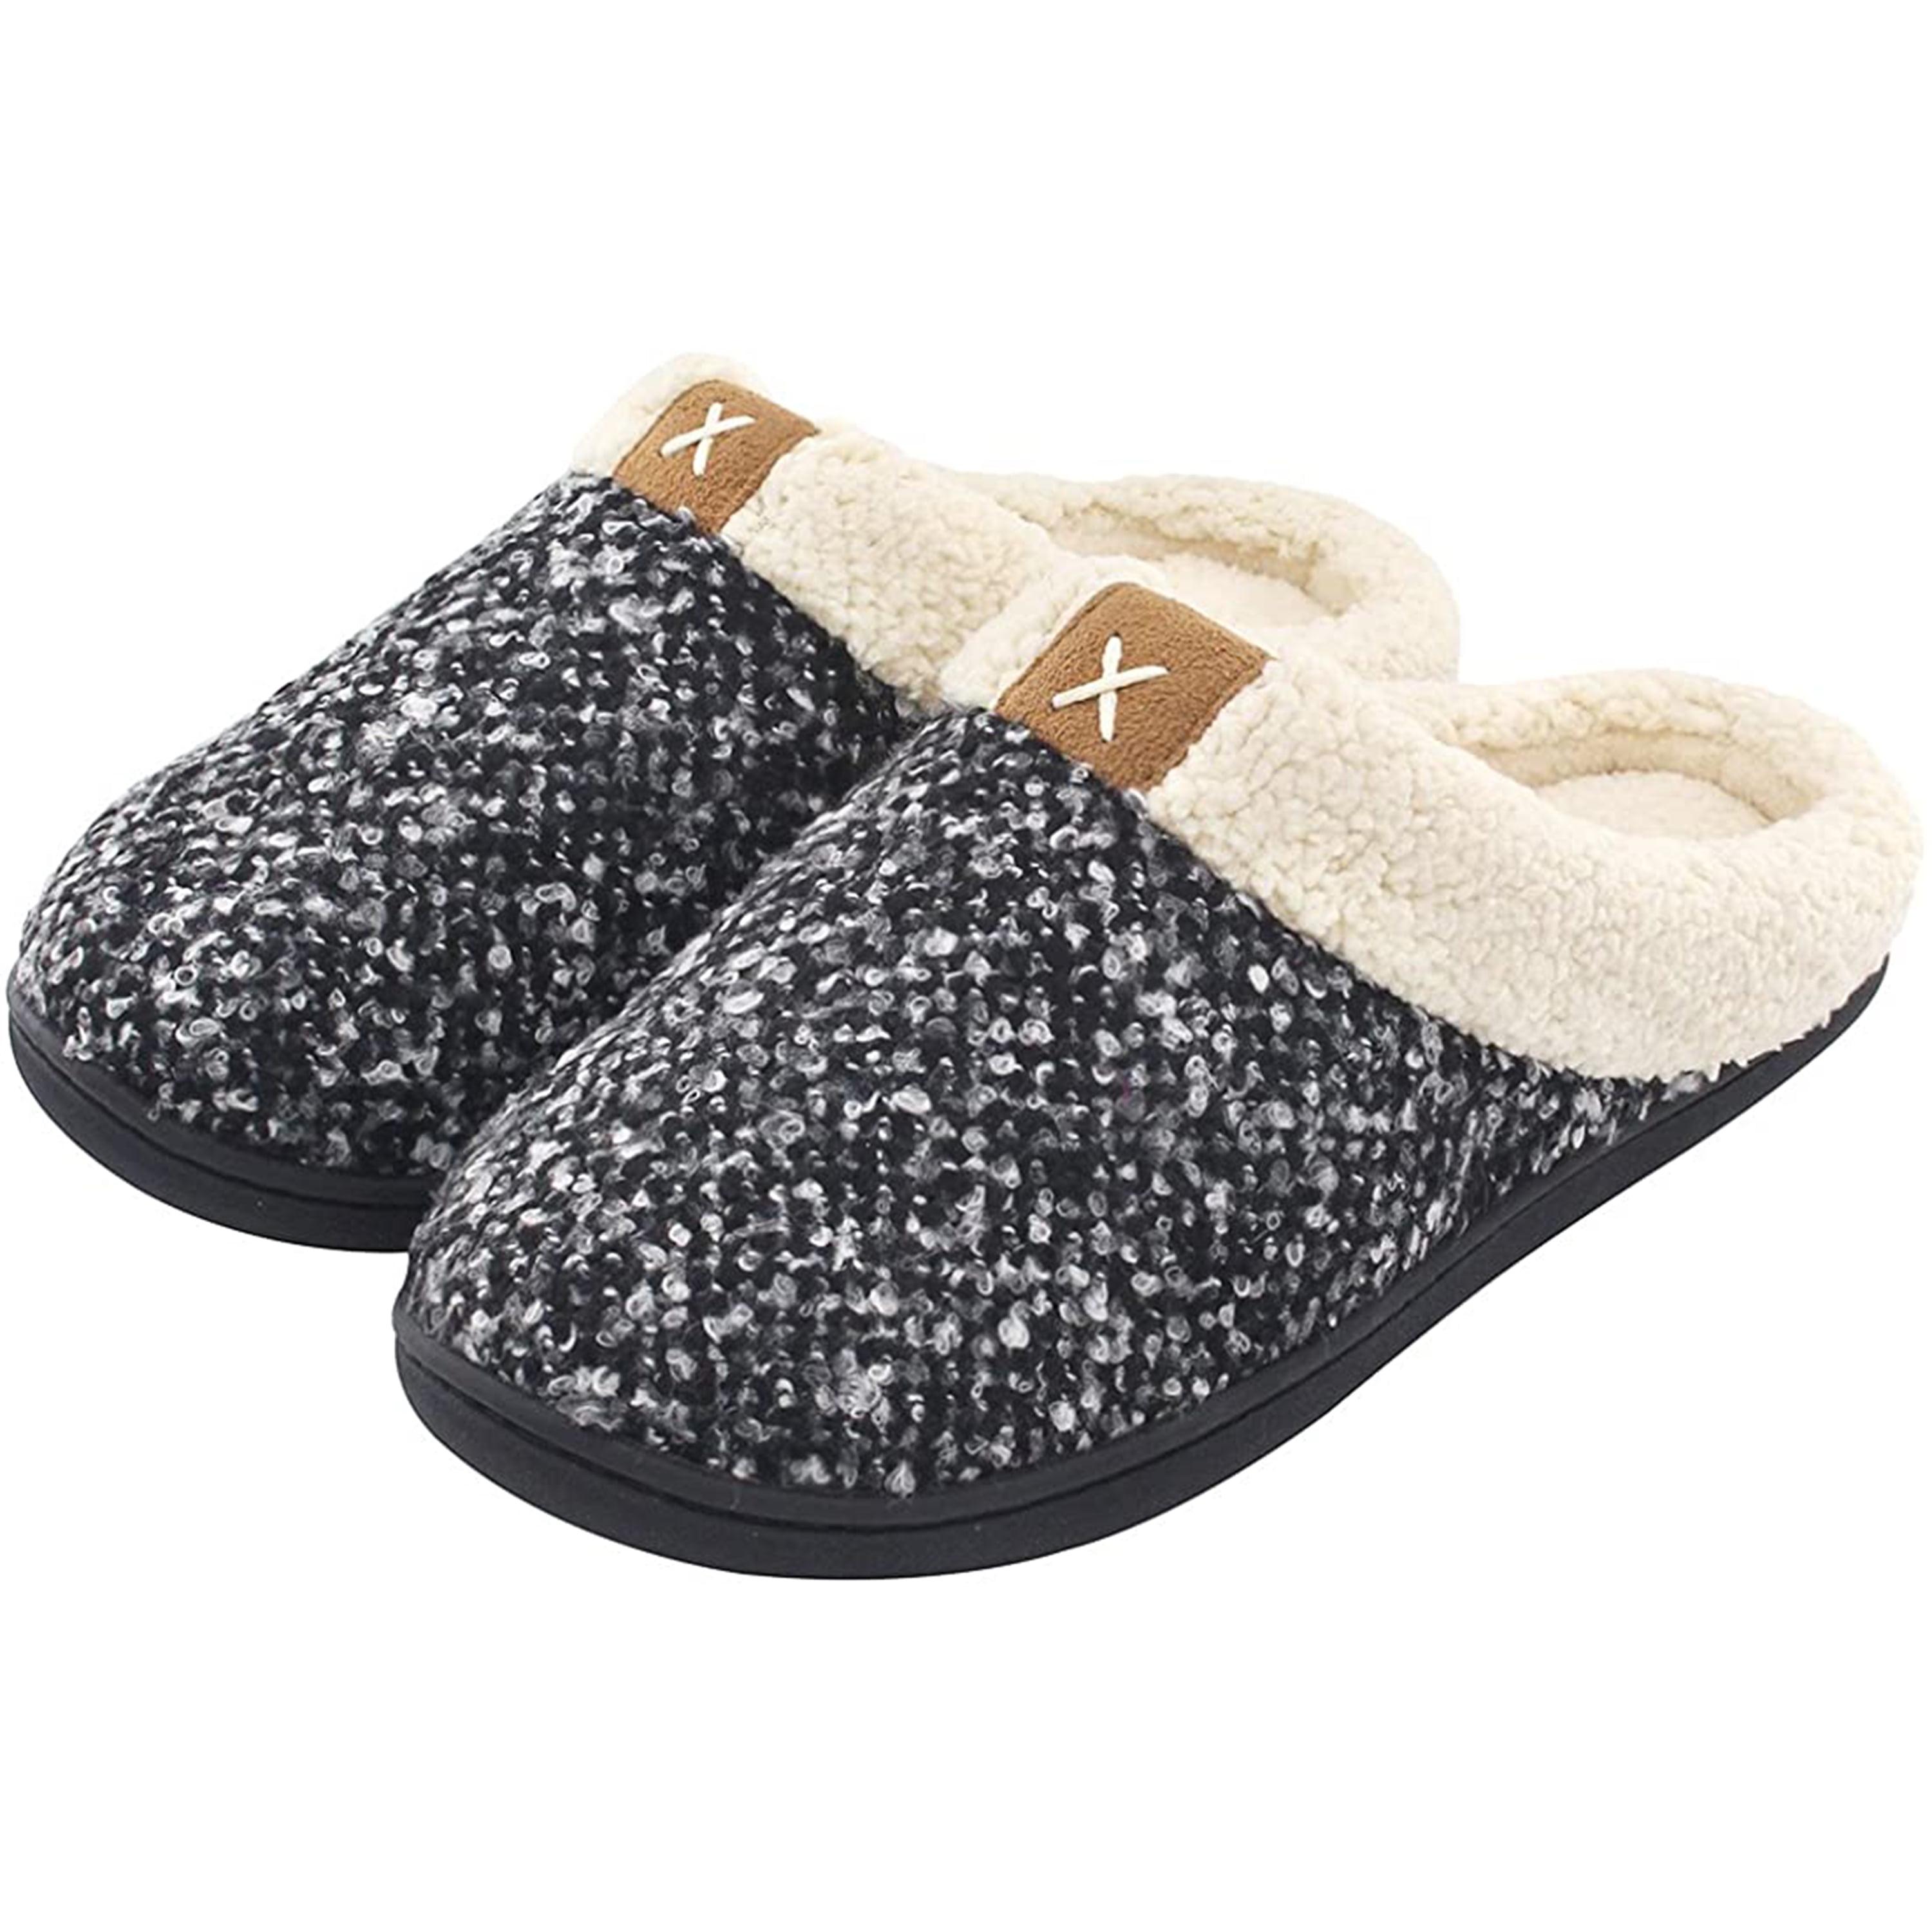 Mens Womens House Slippers Fuzzy Plush Lining Winter Warm Shoes for Indoor Outdoor with Anti-Skid Rubber Sole